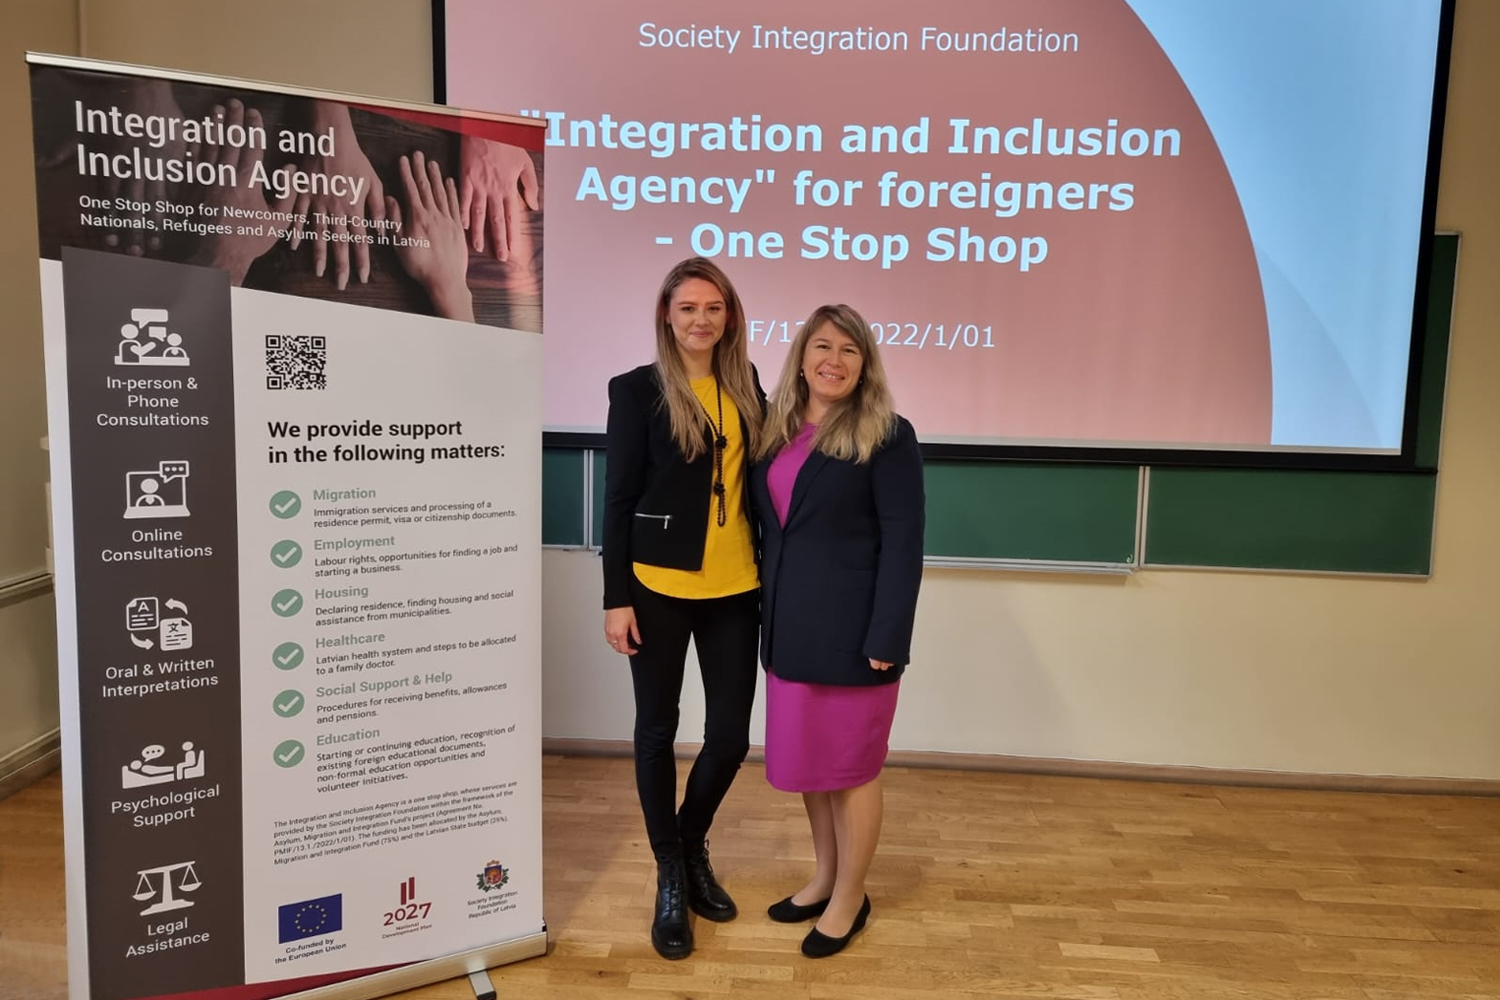 Integration and Inclusion Agency visits University of Liepāja